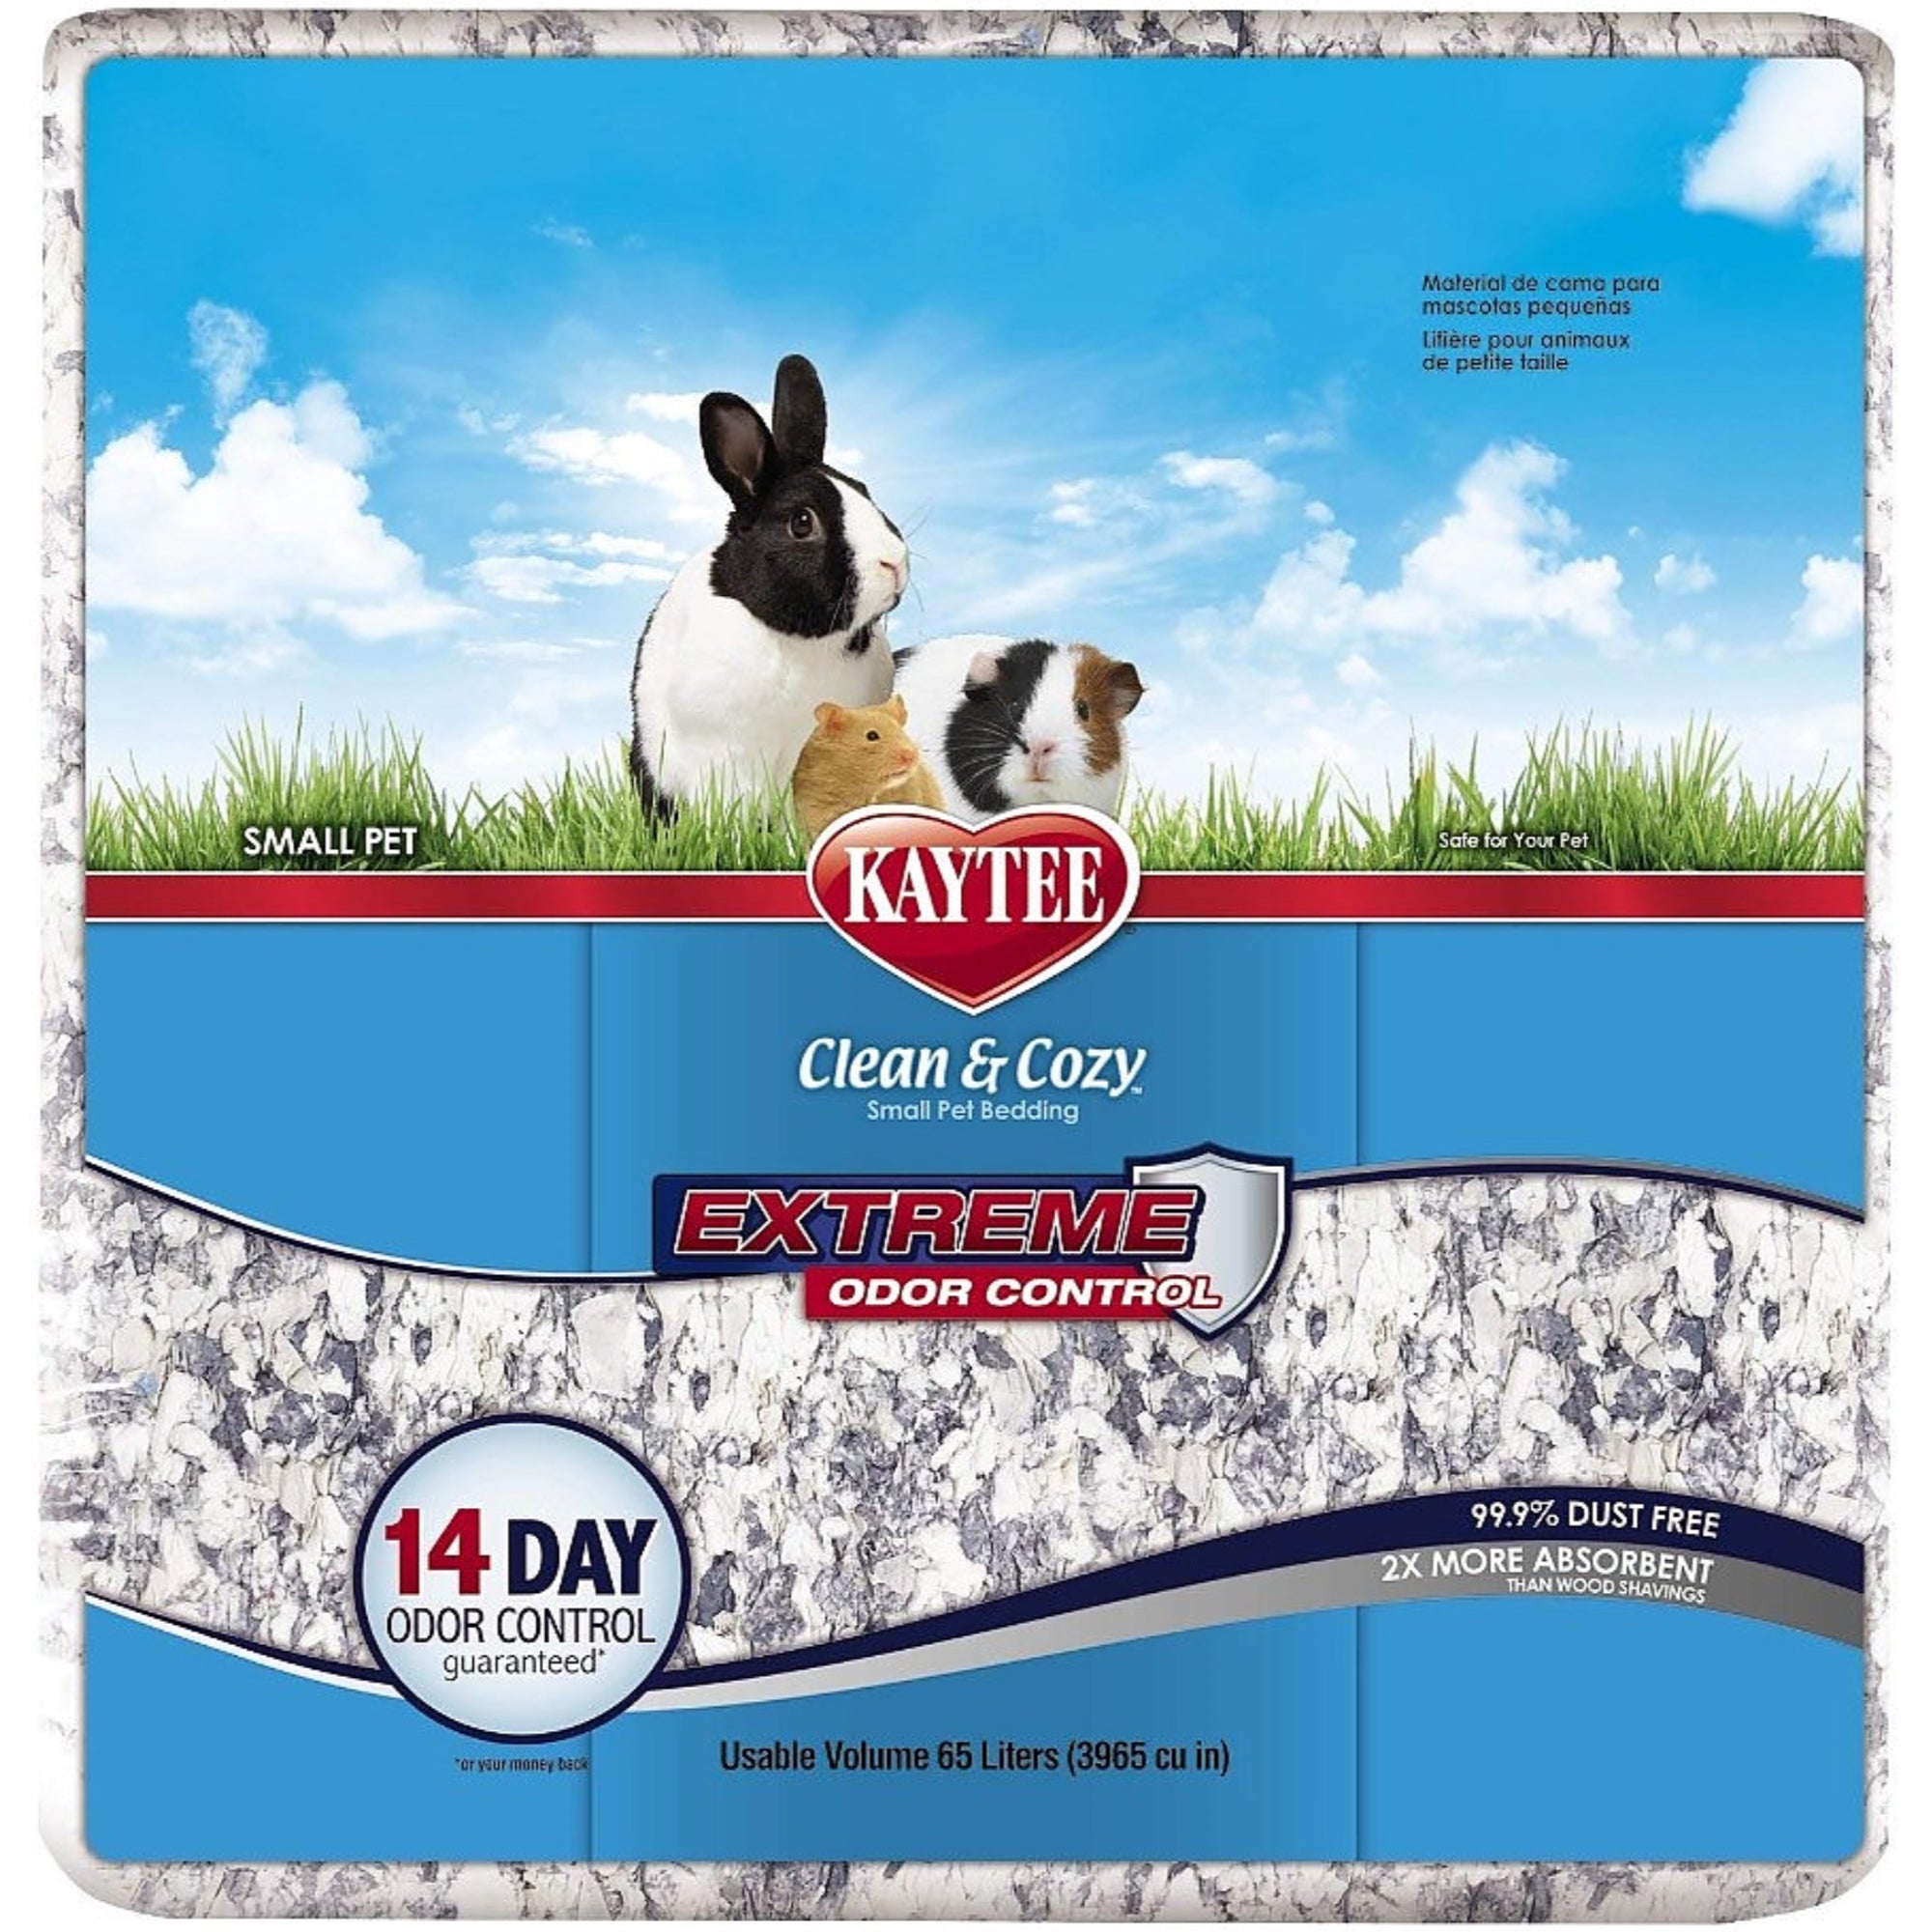 Kaytee Clean and Cozy Small Pet Bedding Extreme Odor Control, 65 Liters